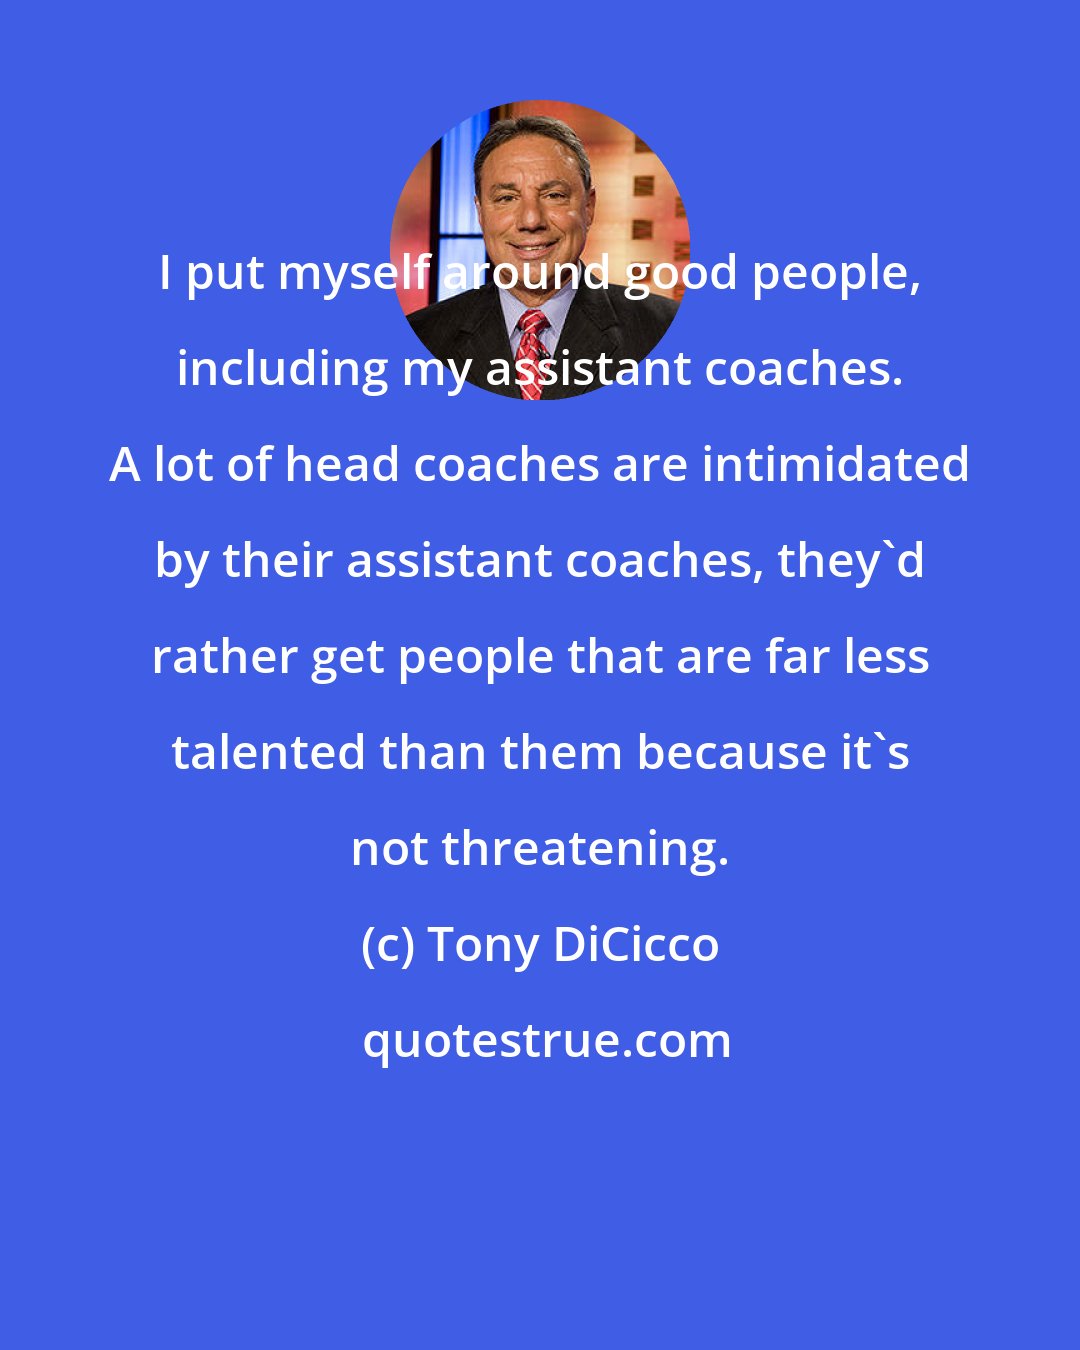 Tony DiCicco: I put myself around good people, including my assistant coaches. A lot of head coaches are intimidated by their assistant coaches, they'd rather get people that are far less talented than them because it's not threatening.